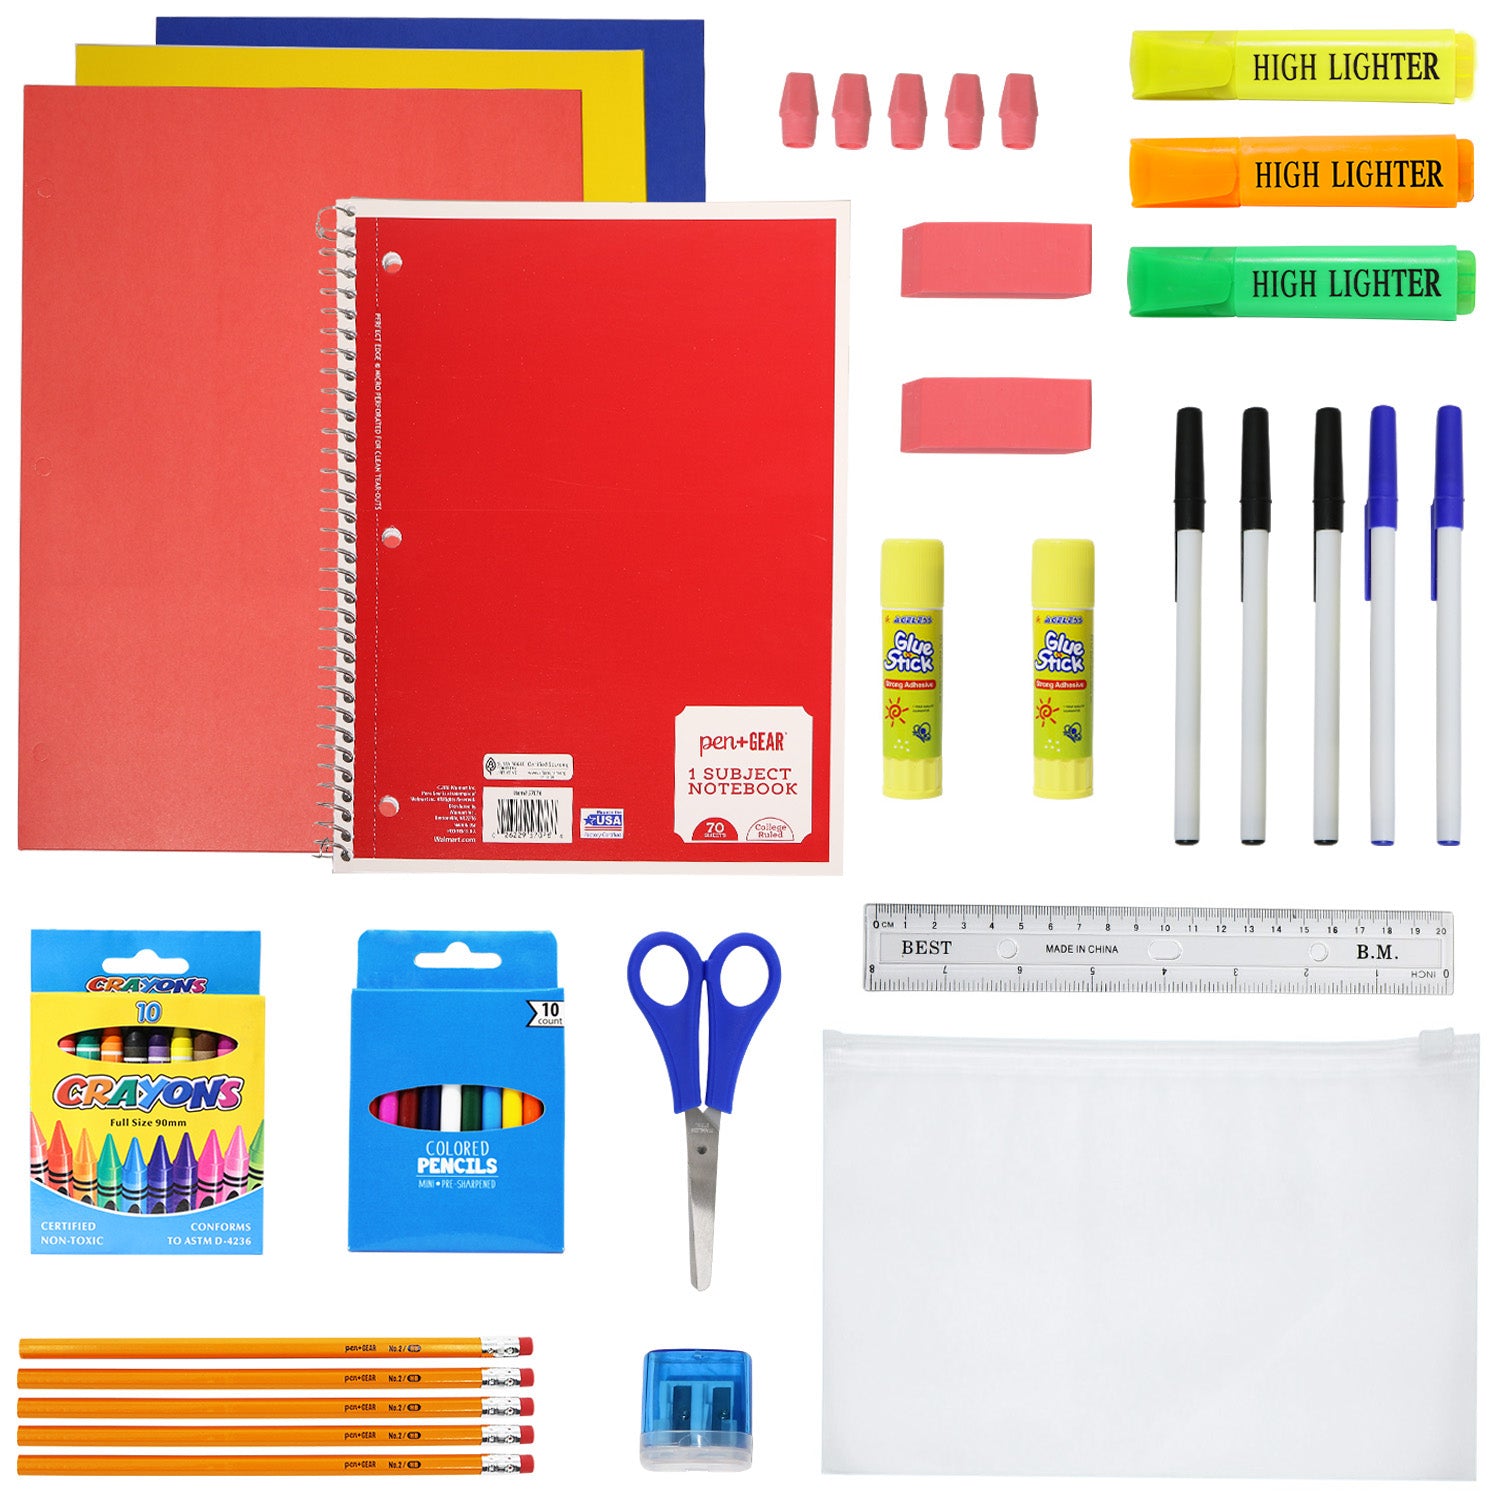 50 Piece Wholesale Deluxe School Supply Kit With 17" Backpack - Bulk Case of 12 Backpacks and Kits